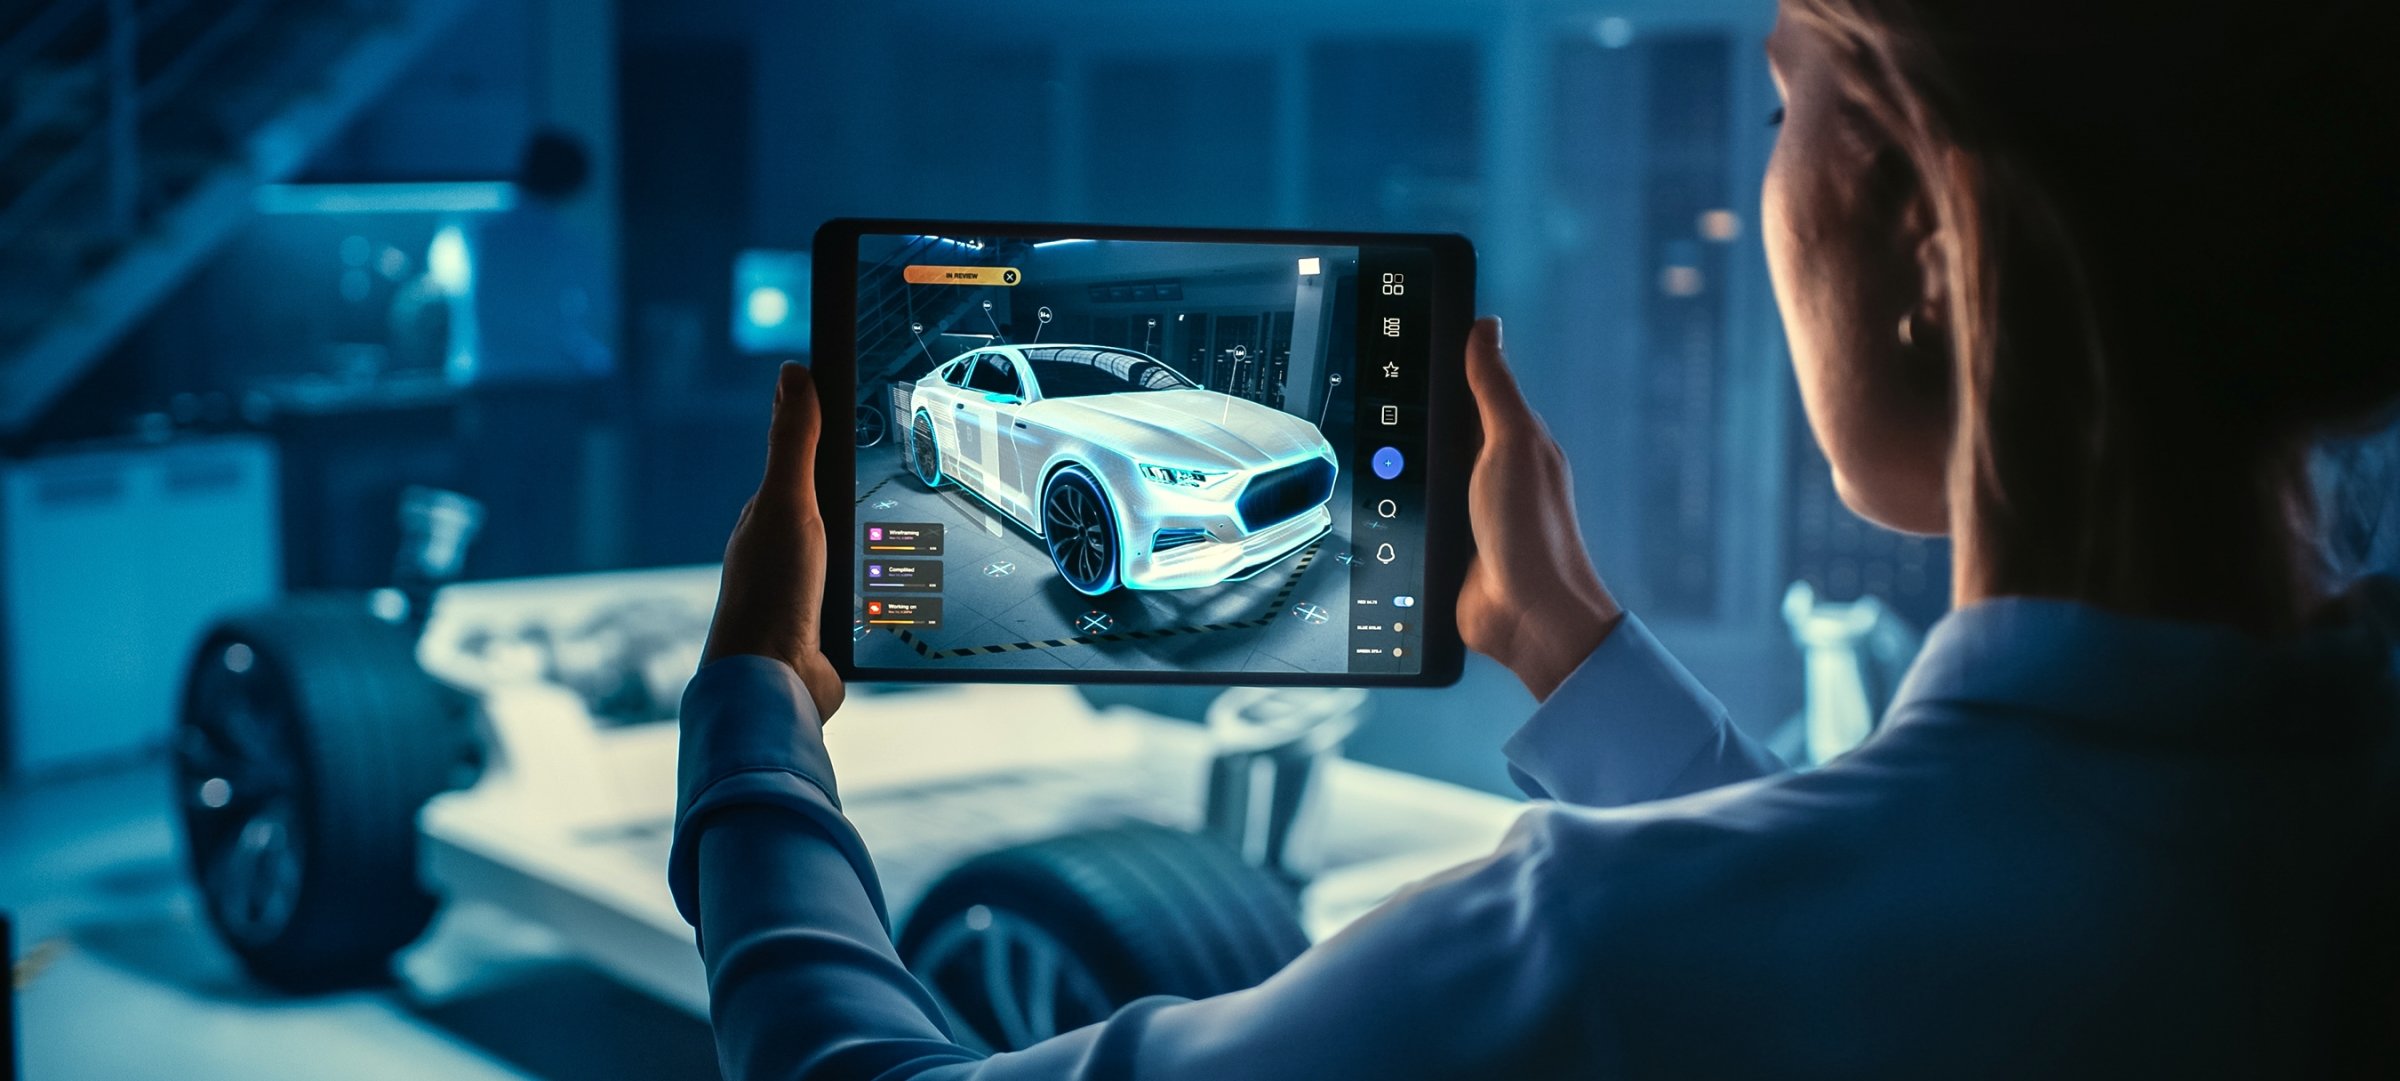 Electric car on tablet screen and in the background